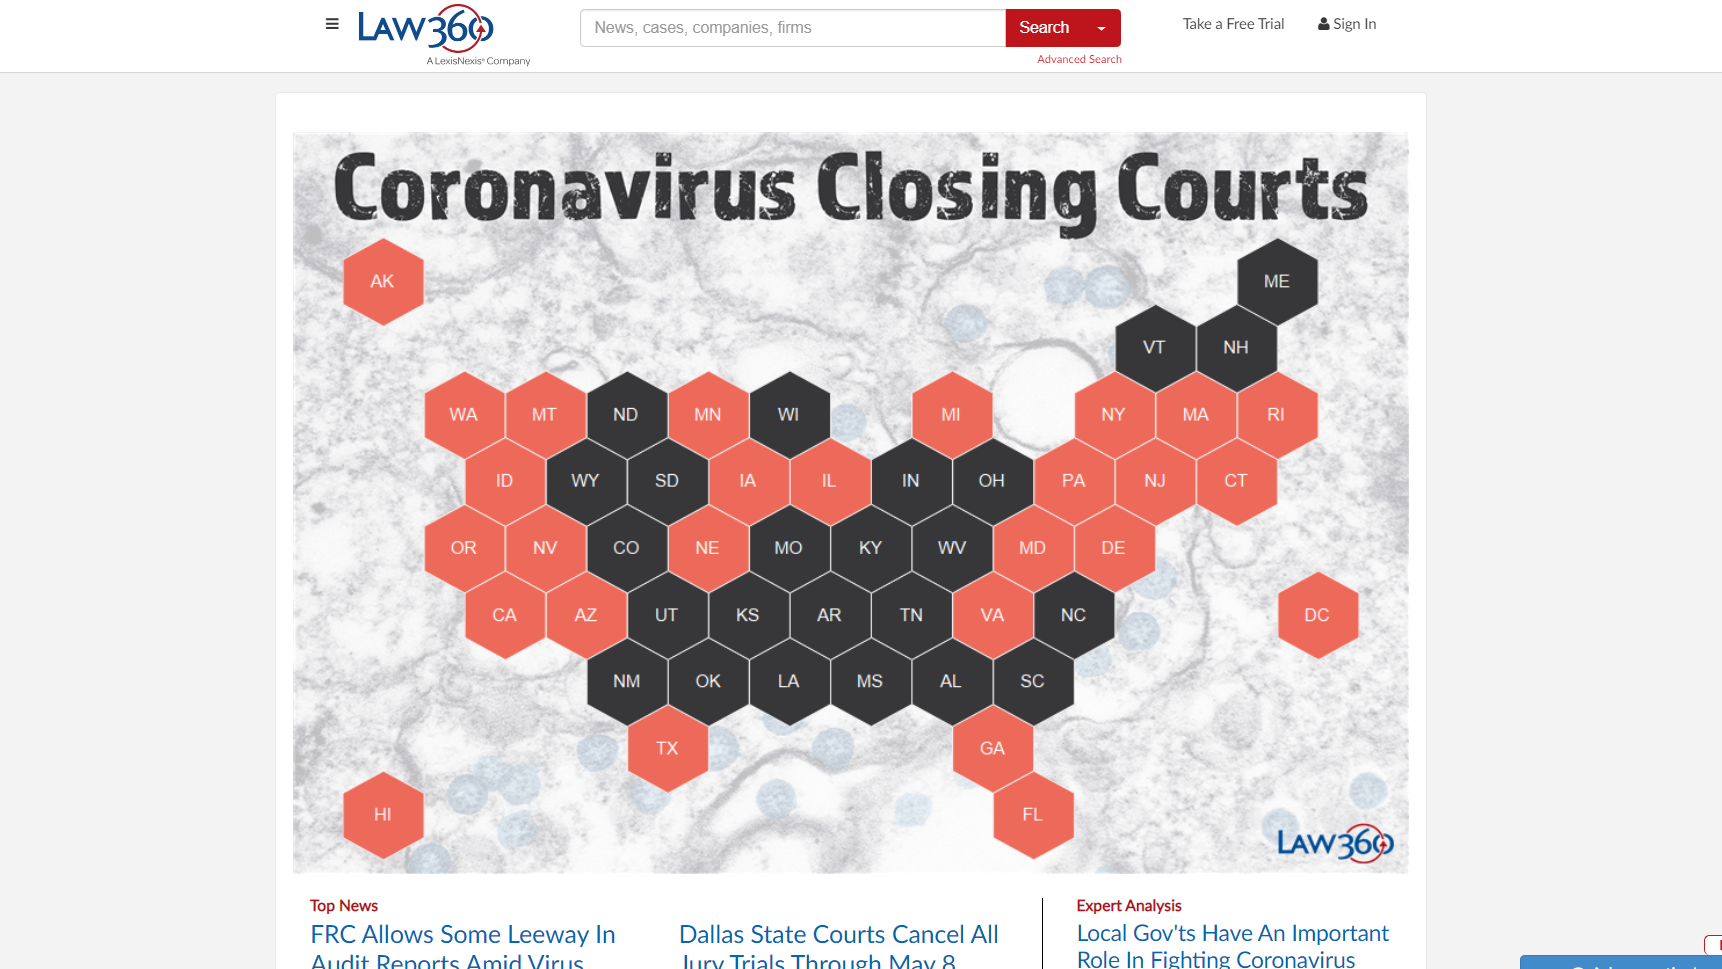 LexisNexis and Law360 Offer Free Coronavirus Legal News and Resources